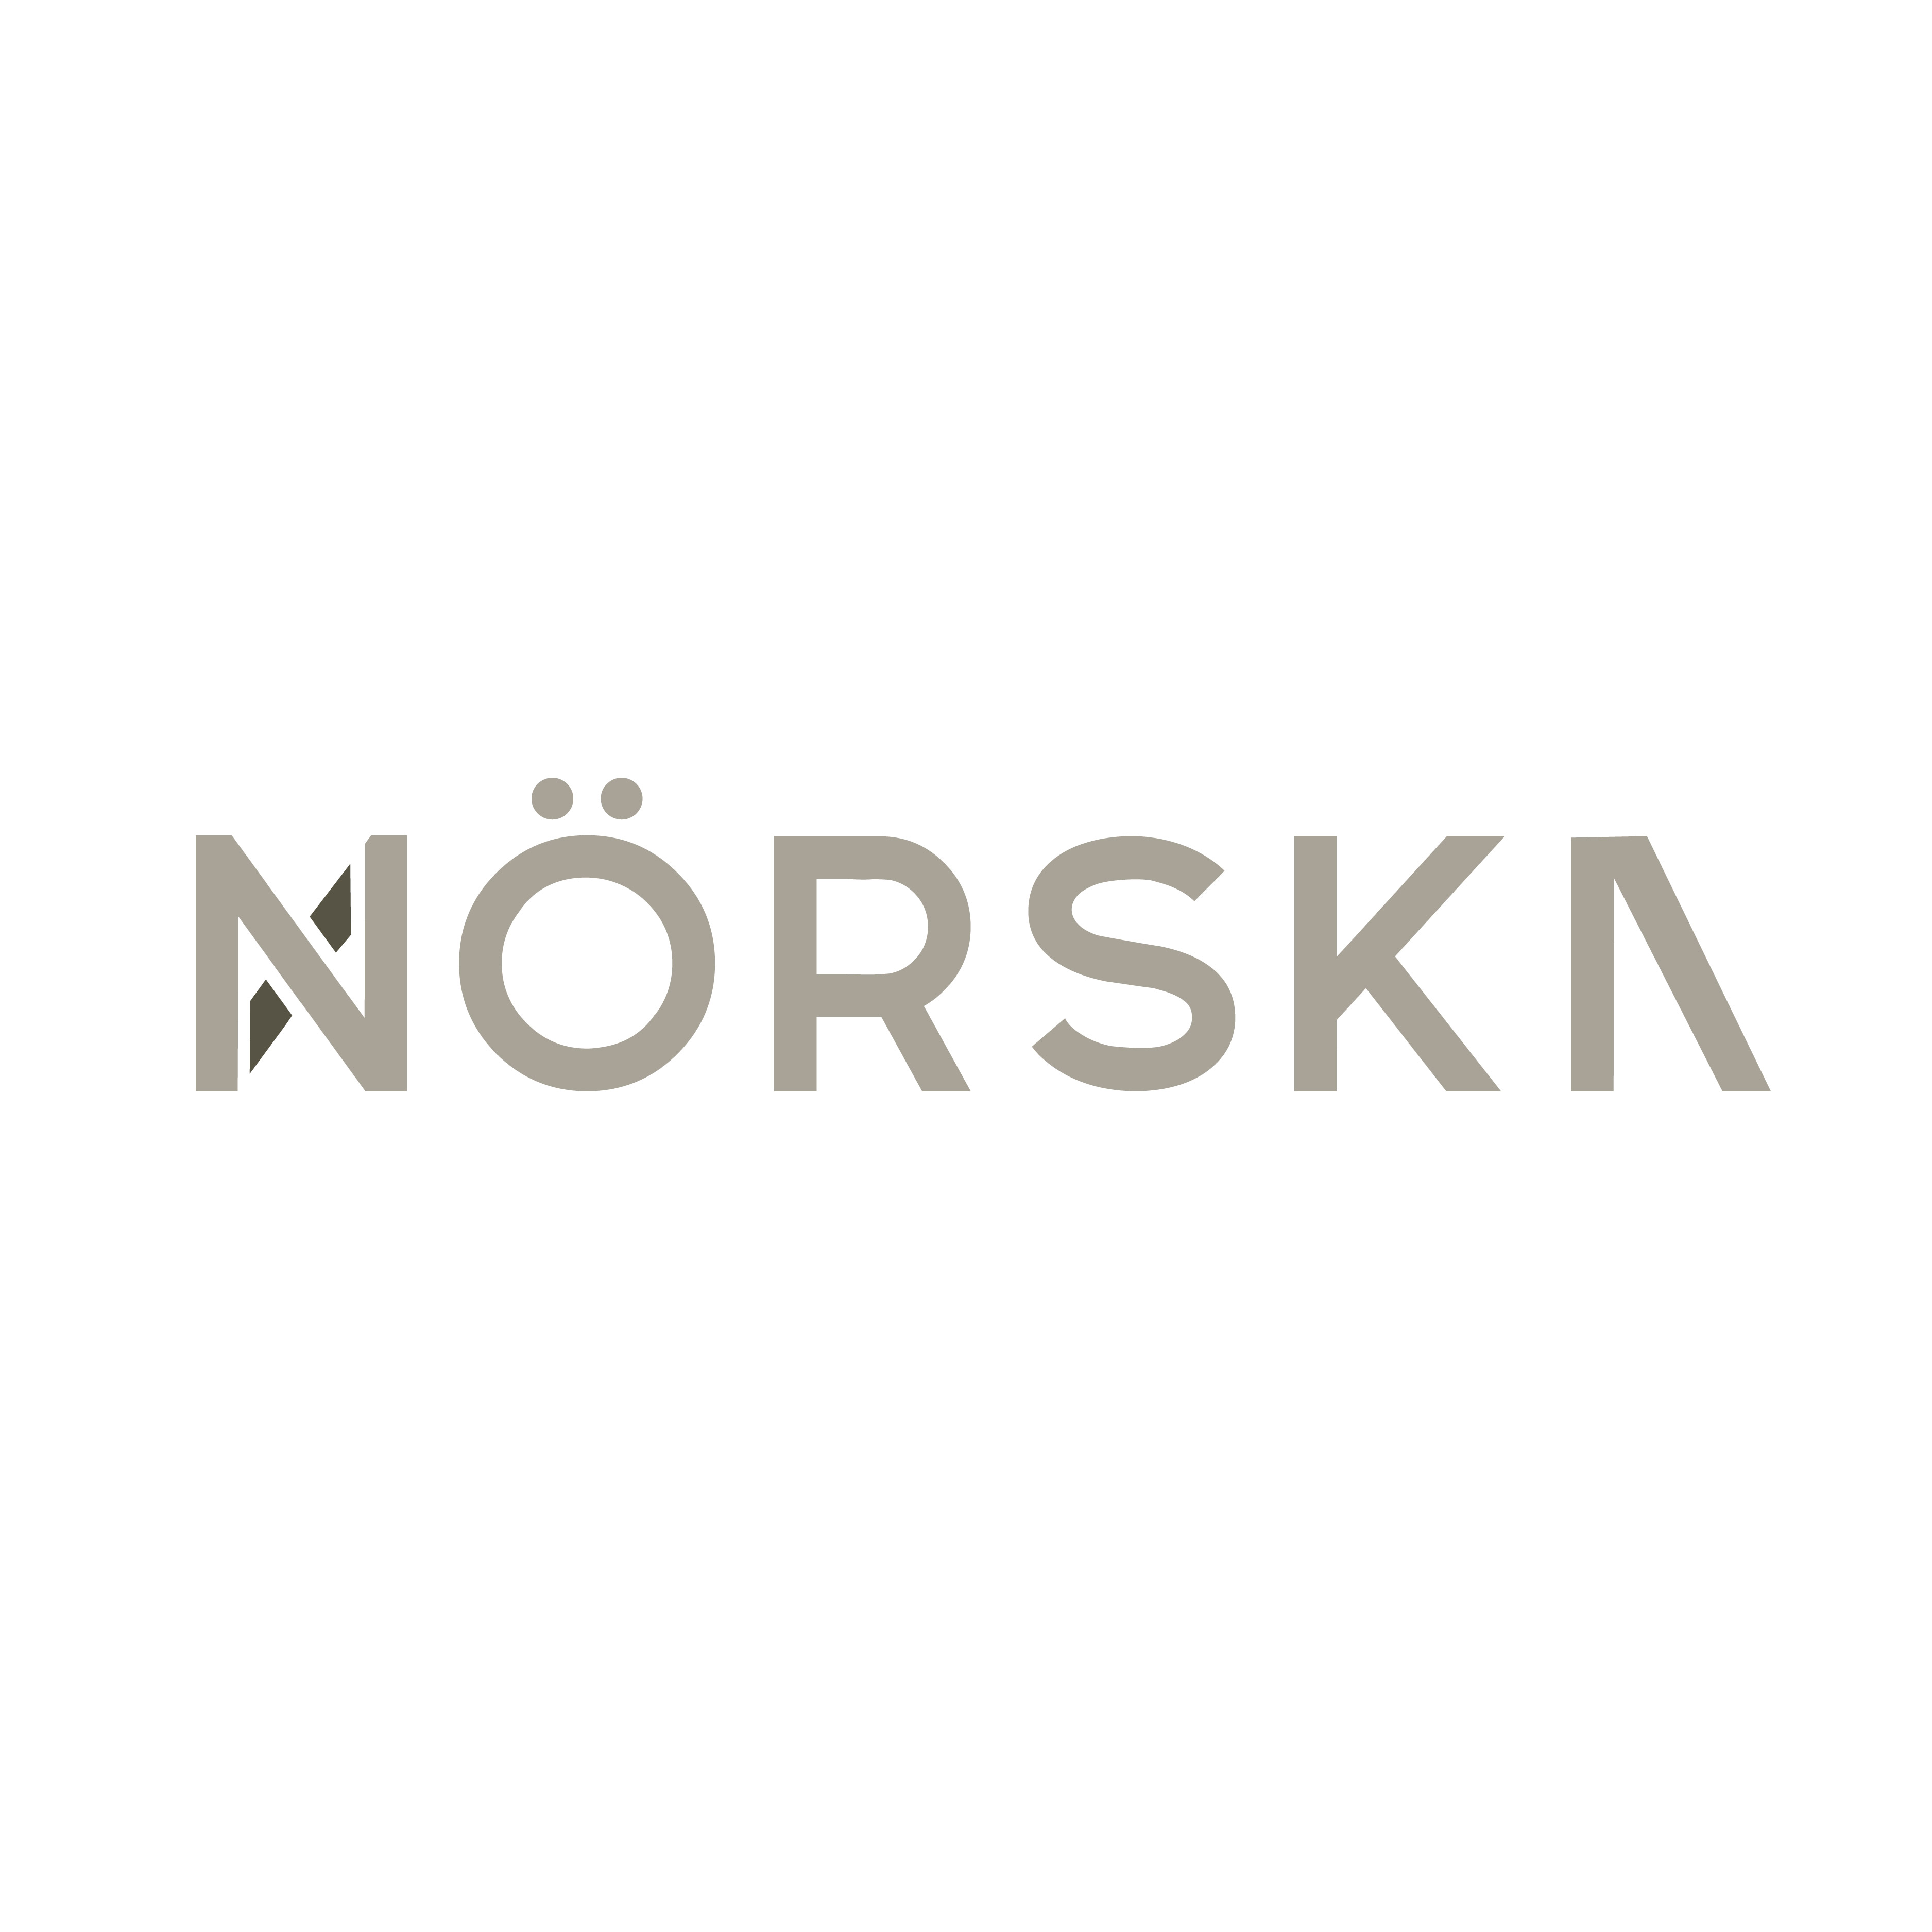 Norska Wordmark logo design by logo designer Neon Pig Creative for your inspiration and for the worlds largest logo competition